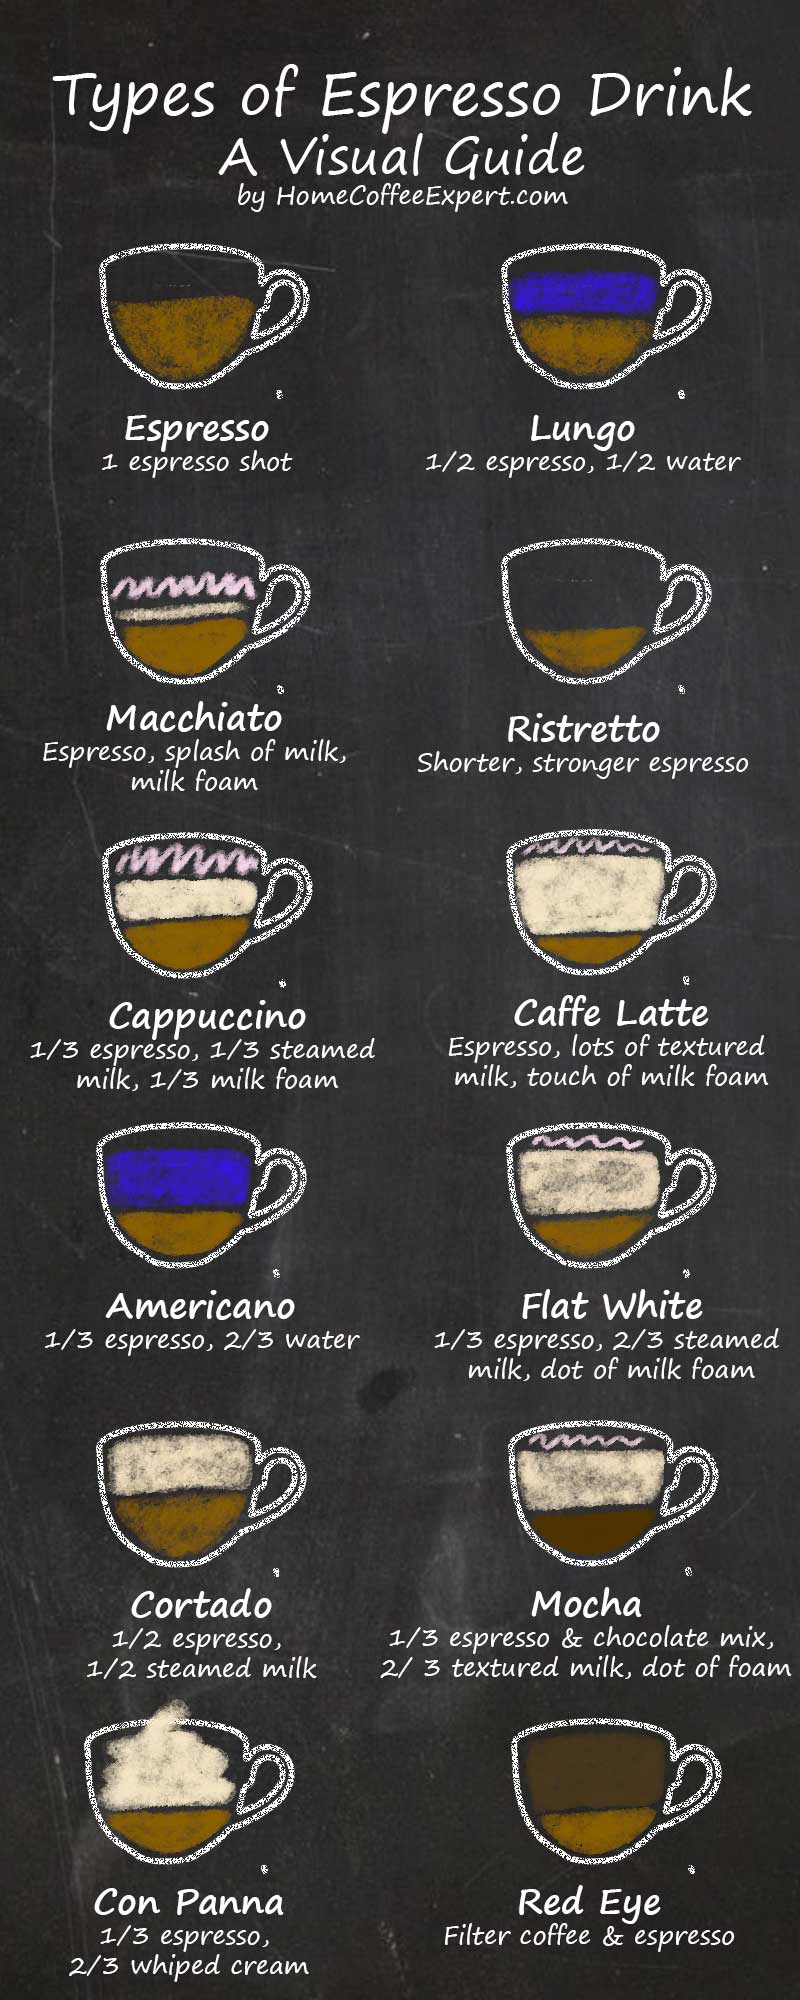 Infographic providing a visual guide to the different types of espresso drinks